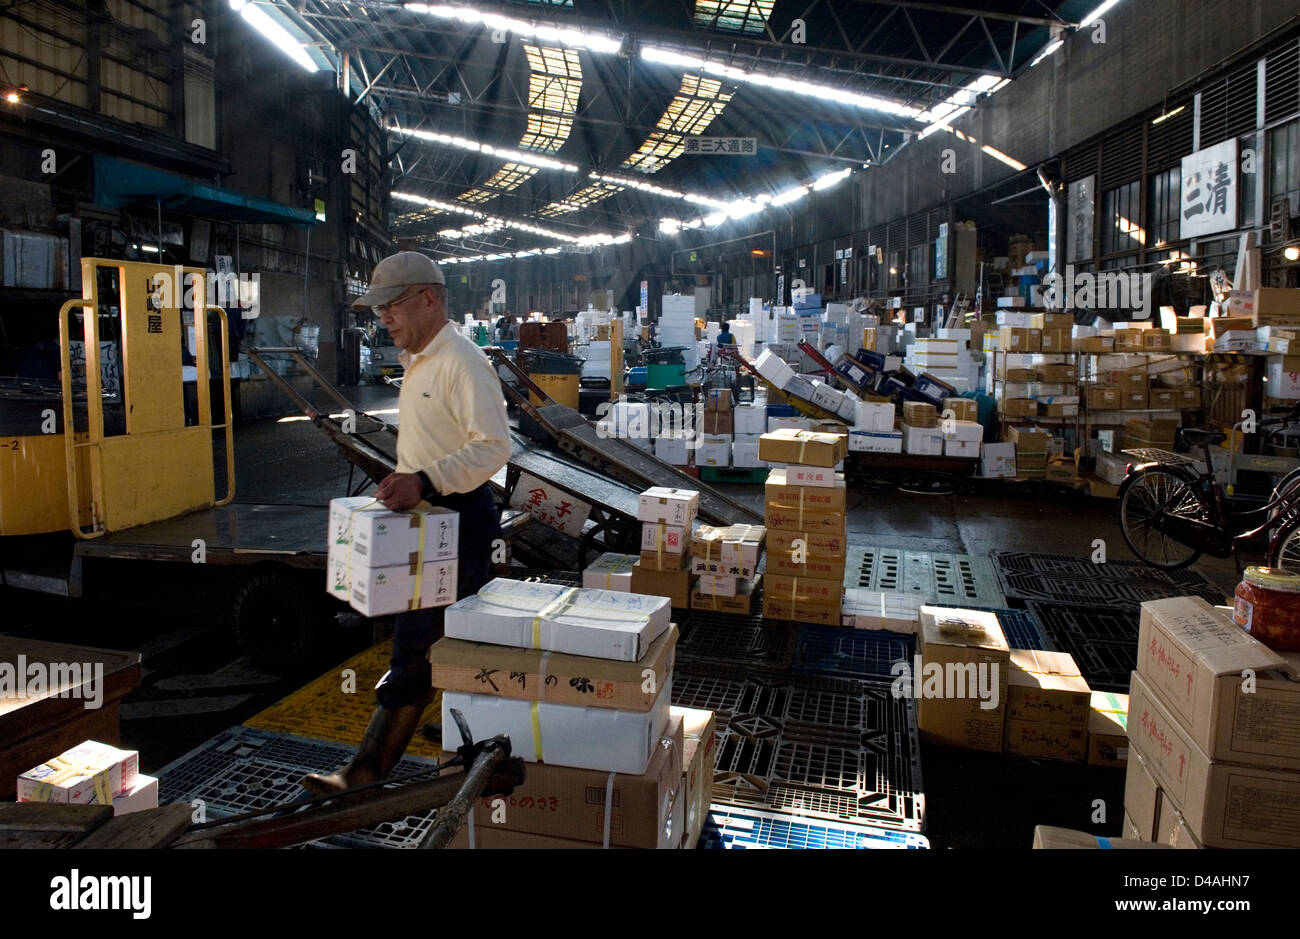 Sunlight filters in through skylights in the distribution and packaging section of Tsukiji Wholesale Fish Market in Tokyo. Stock Photo